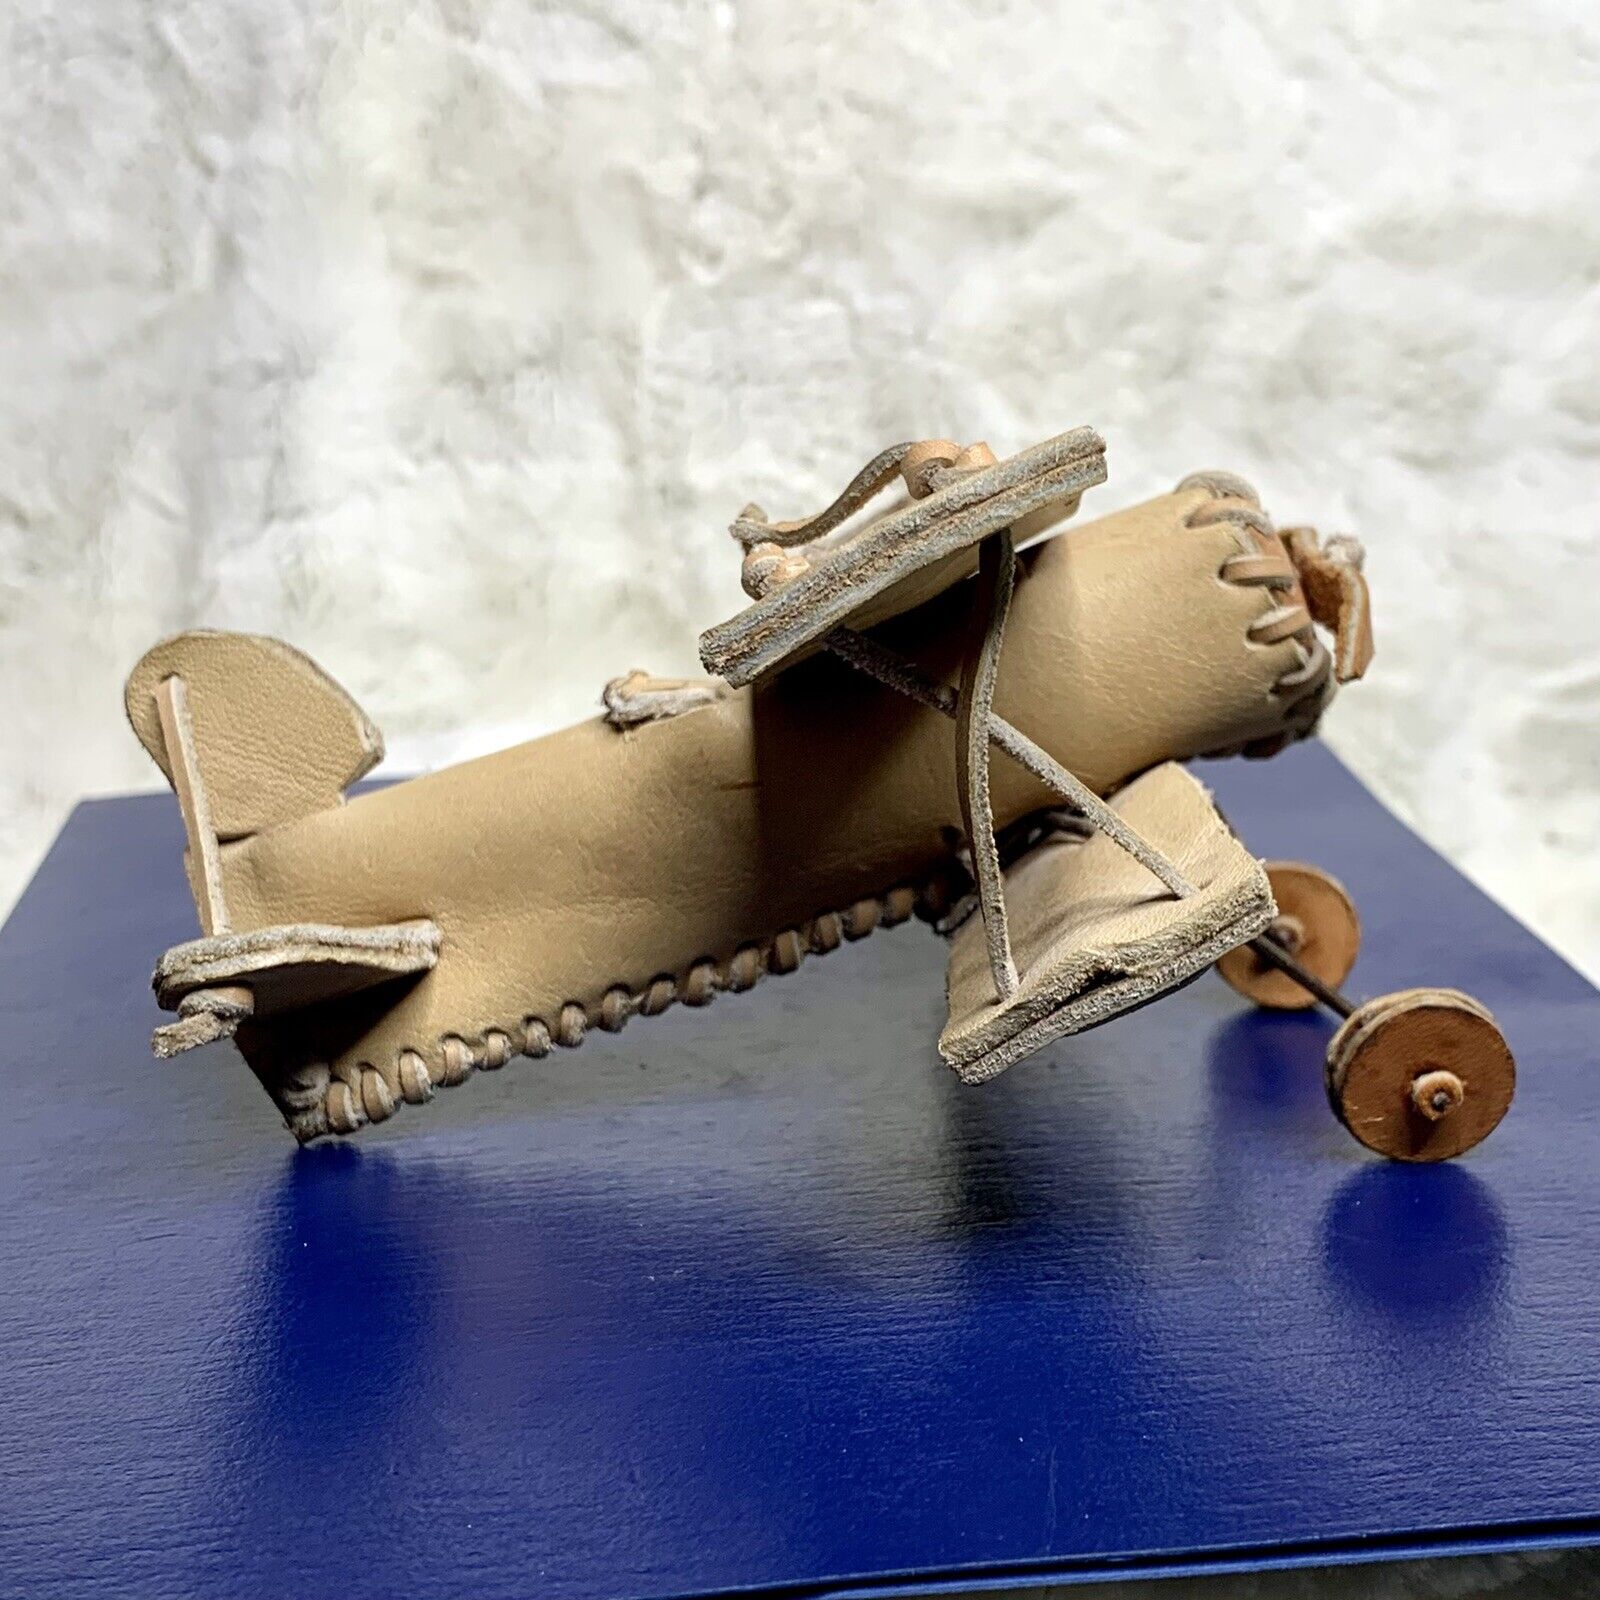 Vintage Biplane Model in Soft Leather Hand Made Replica